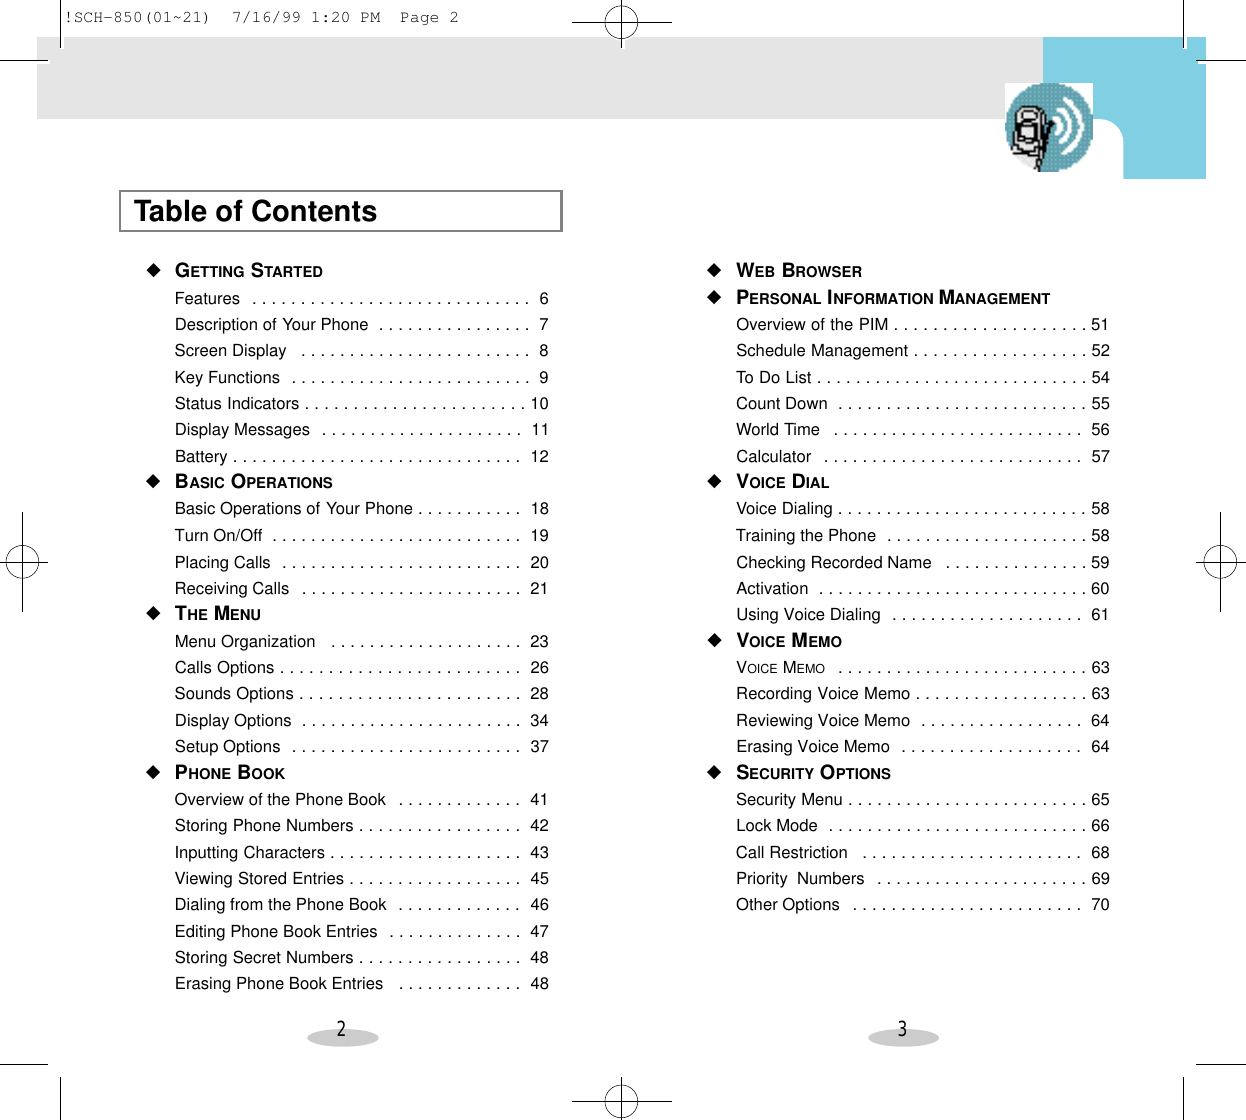 2 3Table of Contents◆GETTING STARTEDFeatures  . . . . . . . . . . . . . . . . . . . . . . . . . . . . . 6Description of Your Phone  . . . . . . . . . . . . . . . . 7Screen Display  . . . . . . . . . . . . . . . . . . . . . . . . 8Key Functions  . . . . . . . . . . . . . . . . . . . . . . . . . 9Status Indicators . . . . . . . . . . . . . . . . . . . . . . . 10Display Messages  . . . . . . . . . . . . . . . . . . . . . 11Battery . . . . . . . . . . . . . . . . . . . . . . . . . . . . . . 12◆BASIC OPERATIONSBasic Operations of Your Phone . . . . . . . . . . . 18Turn On/Off  . . . . . . . . . . . . . . . . . . . . . . . . . . 19Placing Calls  . . . . . . . . . . . . . . . . . . . . . . . . . 20Receiving Calls  . . . . . . . . . . . . . . . . . . . . . . . 21◆THE MENUMenu Organization  . . . . . . . . . . . . . . . . . . . . 23Calls Options . . . . . . . . . . . . . . . . . . . . . . . . . 26Sounds Options . . . . . . . . . . . . . . . . . . . . . . . 28Display Options  . . . . . . . . . . . . . . . . . . . . . . . 34Setup Options  . . . . . . . . . . . . . . . . . . . . . . . . 37◆PHONE BOOKOverview of the Phone Book  . . . . . . . . . . . . . 41Storing Phone Numbers . . . . . . . . . . . . . . . . . 42Inputting Characters . . . . . . . . . . . . . . . . . . . . 43Viewing Stored Entries . . . . . . . . . . . . . . . . . . 45Dialing from the Phone Book  . . . . . . . . . . . . . 46Editing Phone Book Entries  . . . . . . . . . . . . . . 47Storing Secret Numbers . . . . . . . . . . . . . . . . . 48Erasing Phone Book Entries  . . . . . . . . . . . . . 48◆WEB BROWSER◆PERSONAL INFORMATION MANAGEMENTOverview of the PIM . . . . . . . . . . . . . . . . . . . . 51Schedule Management . . . . . . . . . . . . . . . . . . 52To Do List . . . . . . . . . . . . . . . . . . . . . . . . . . . . 54Count Down  . . . . . . . . . . . . . . . . . . . . . . . . . . 55World Time  . . . . . . . . . . . . . . . . . . . . . . . . . . 56Calculator  . . . . . . . . . . . . . . . . . . . . . . . . . . . 57◆VOICE DIALVoice Dialing . . . . . . . . . . . . . . . . . . . . . . . . . . 58Training the Phone  . . . . . . . . . . . . . . . . . . . . . 58Checking Recorded Name  . . . . . . . . . . . . . . . 59Activation  . . . . . . . . . . . . . . . . . . . . . . . . . . . . 60Using Voice Dialing  . . . . . . . . . . . . . . . . . . . . 61◆VOICE MEMOVOICE MEMO  . . . . . . . . . . . . . . . . . . . . . . . . . . 63Recording Voice Memo . . . . . . . . . . . . . . . . . . 63Reviewing Voice Memo  . . . . . . . . . . . . . . . . . 64Erasing Voice Memo  . . . . . . . . . . . . . . . . . . . 64◆SECURITY OPTIONSSecurity Menu . . . . . . . . . . . . . . . . . . . . . . . . . 65Lock Mode  . . . . . . . . . . . . . . . . . . . . . . . . . . . 66Call Restriction  . . . . . . . . . . . . . . . . . . . . . . . 68Priority  Numbers  . . . . . . . . . . . . . . . . . . . . . . 69Other Options  . . . . . . . . . . . . . . . . . . . . . . . . 70!SCH-850(01~21)  7/16/99 1:20 PM  Page 2